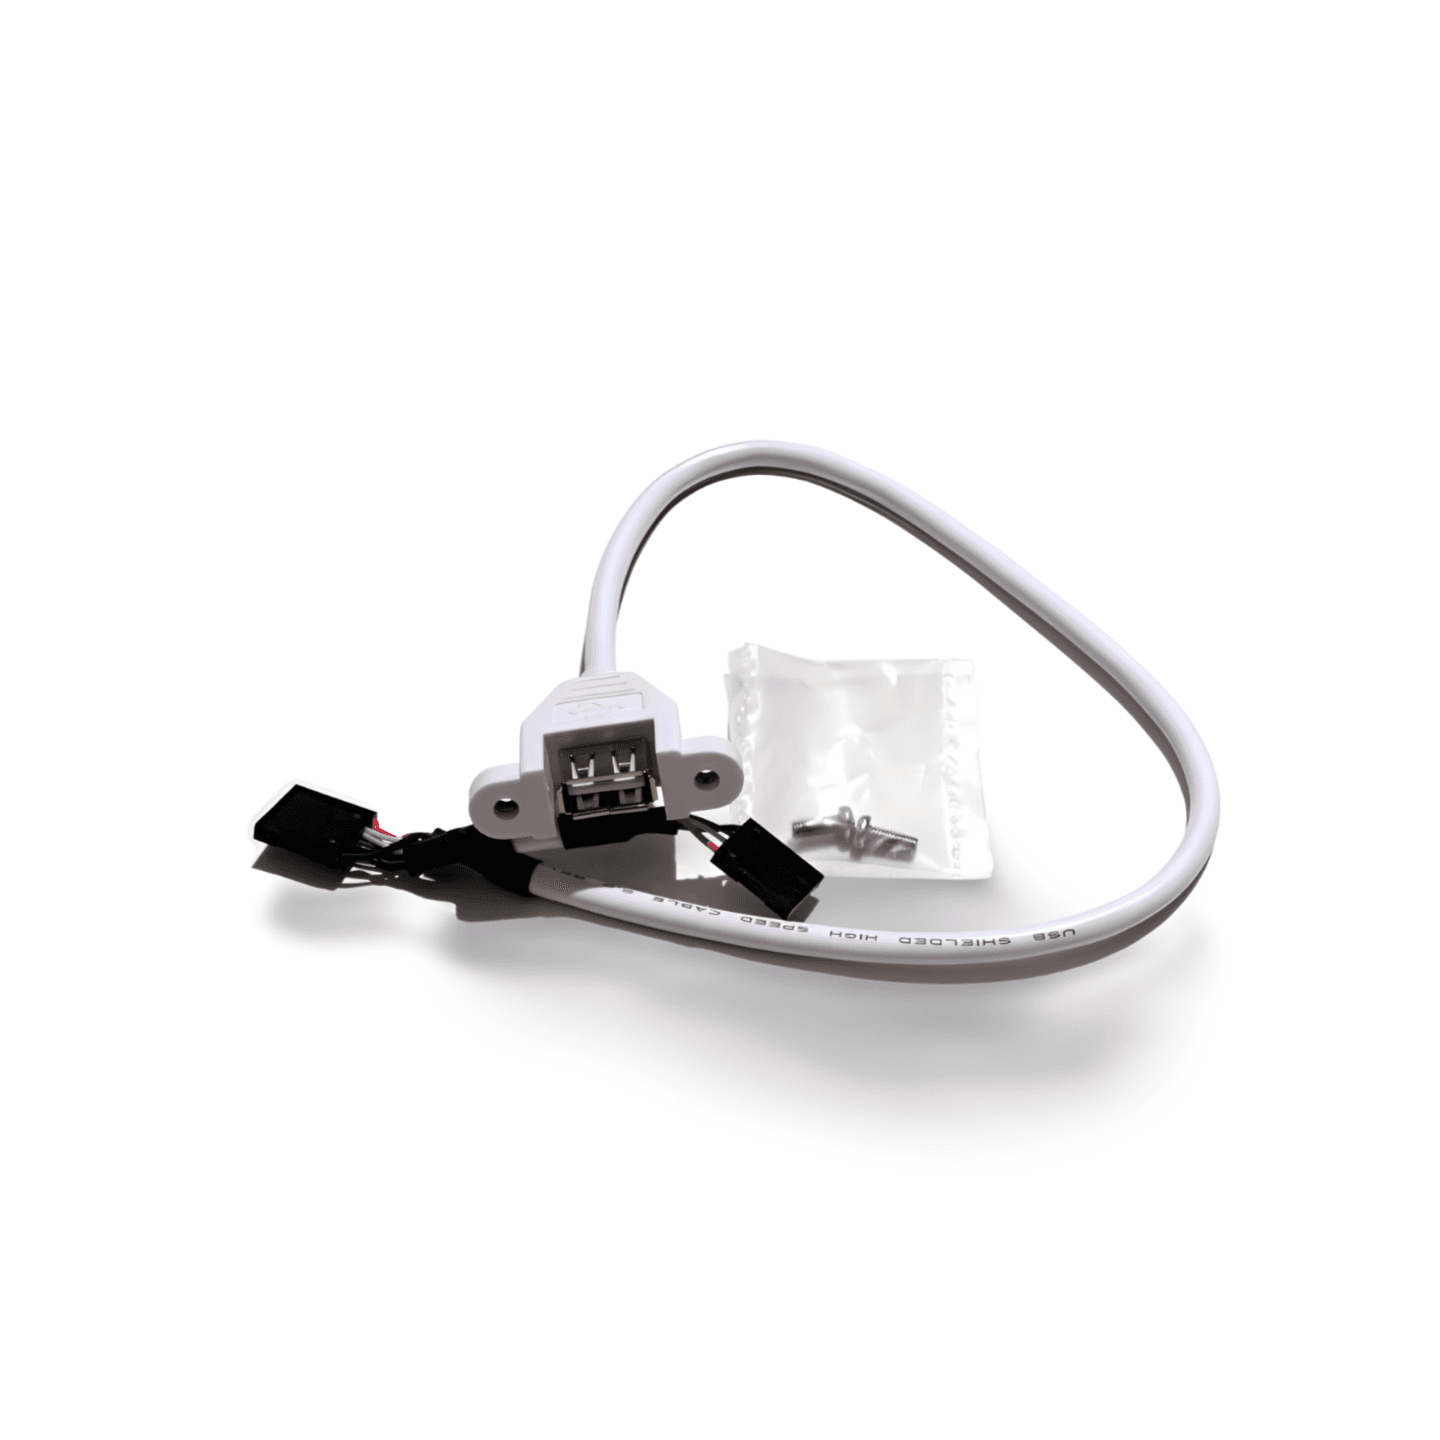 1 2ft USB Port Single to Mainboard Port Universal Header Cable white